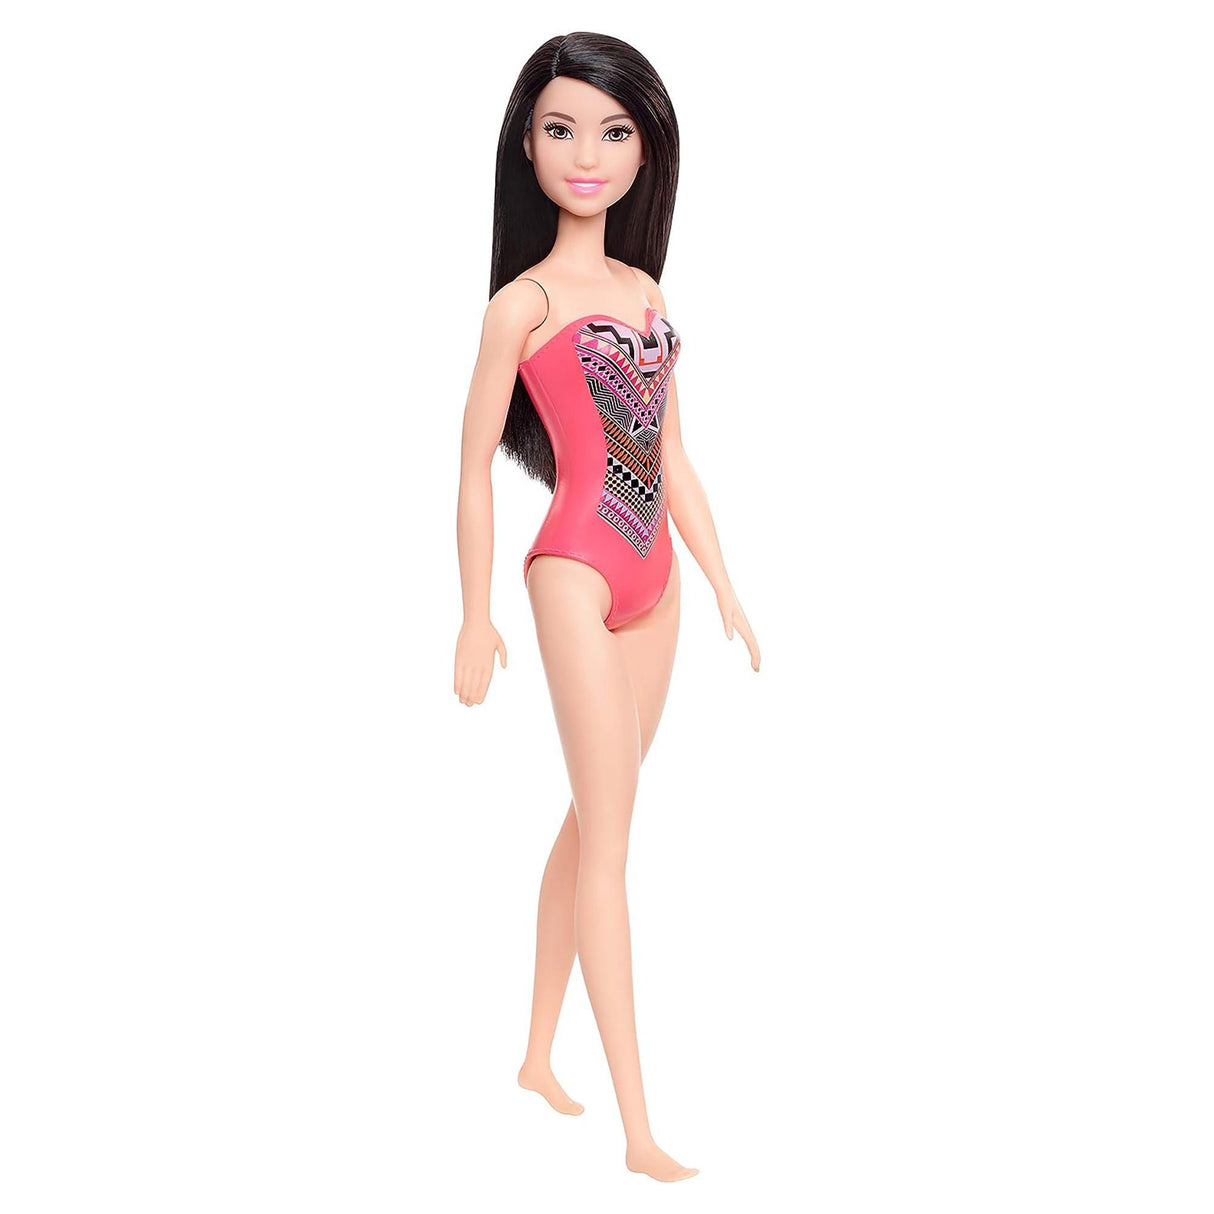 Barbie Swimsuit Doll - Pink Swimsuit